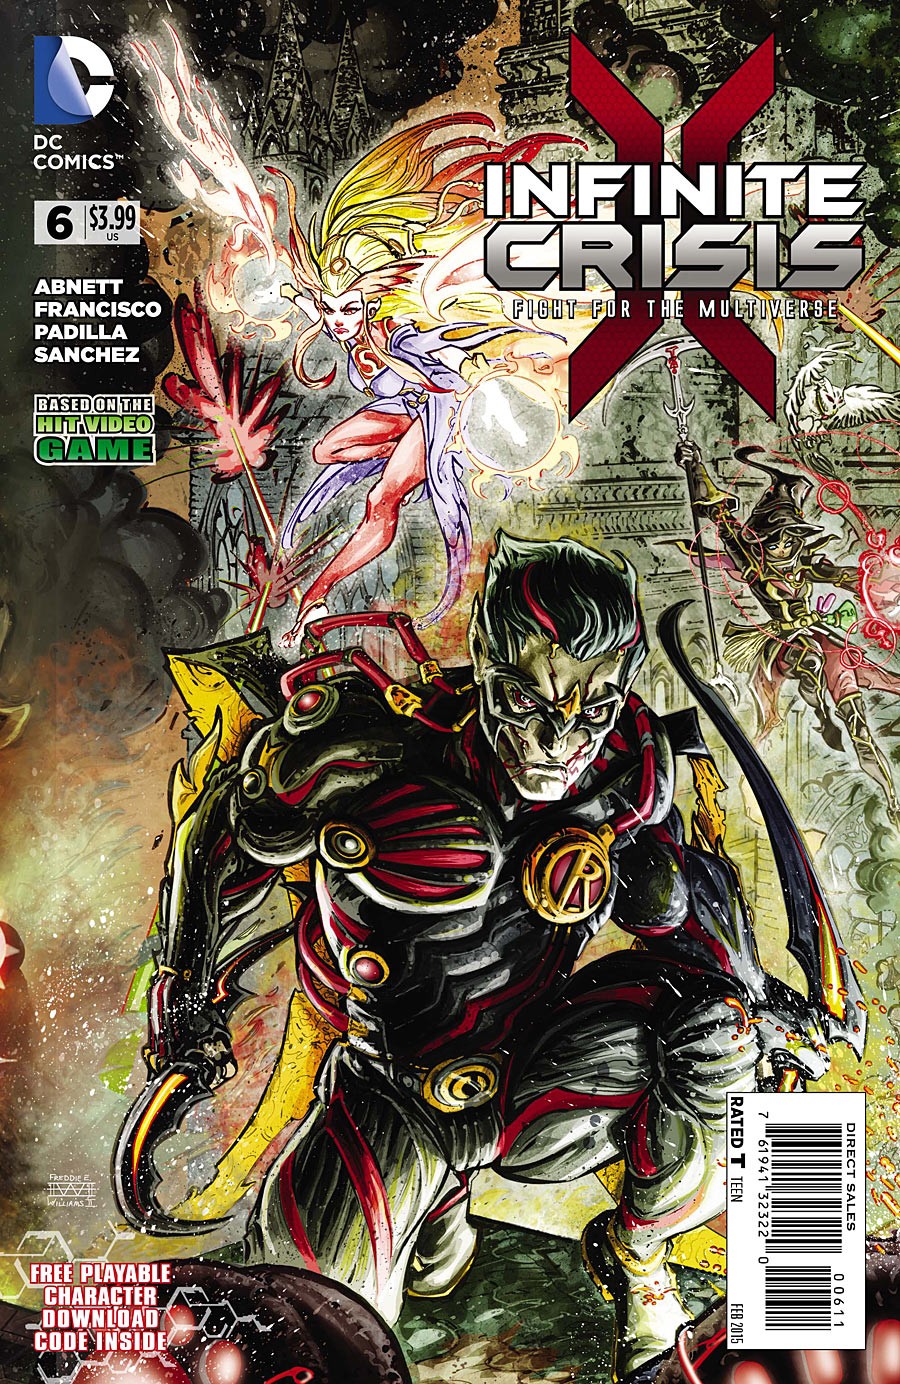 Infinite Crisis: The Fight for the Multiverse Vol. 1 #6